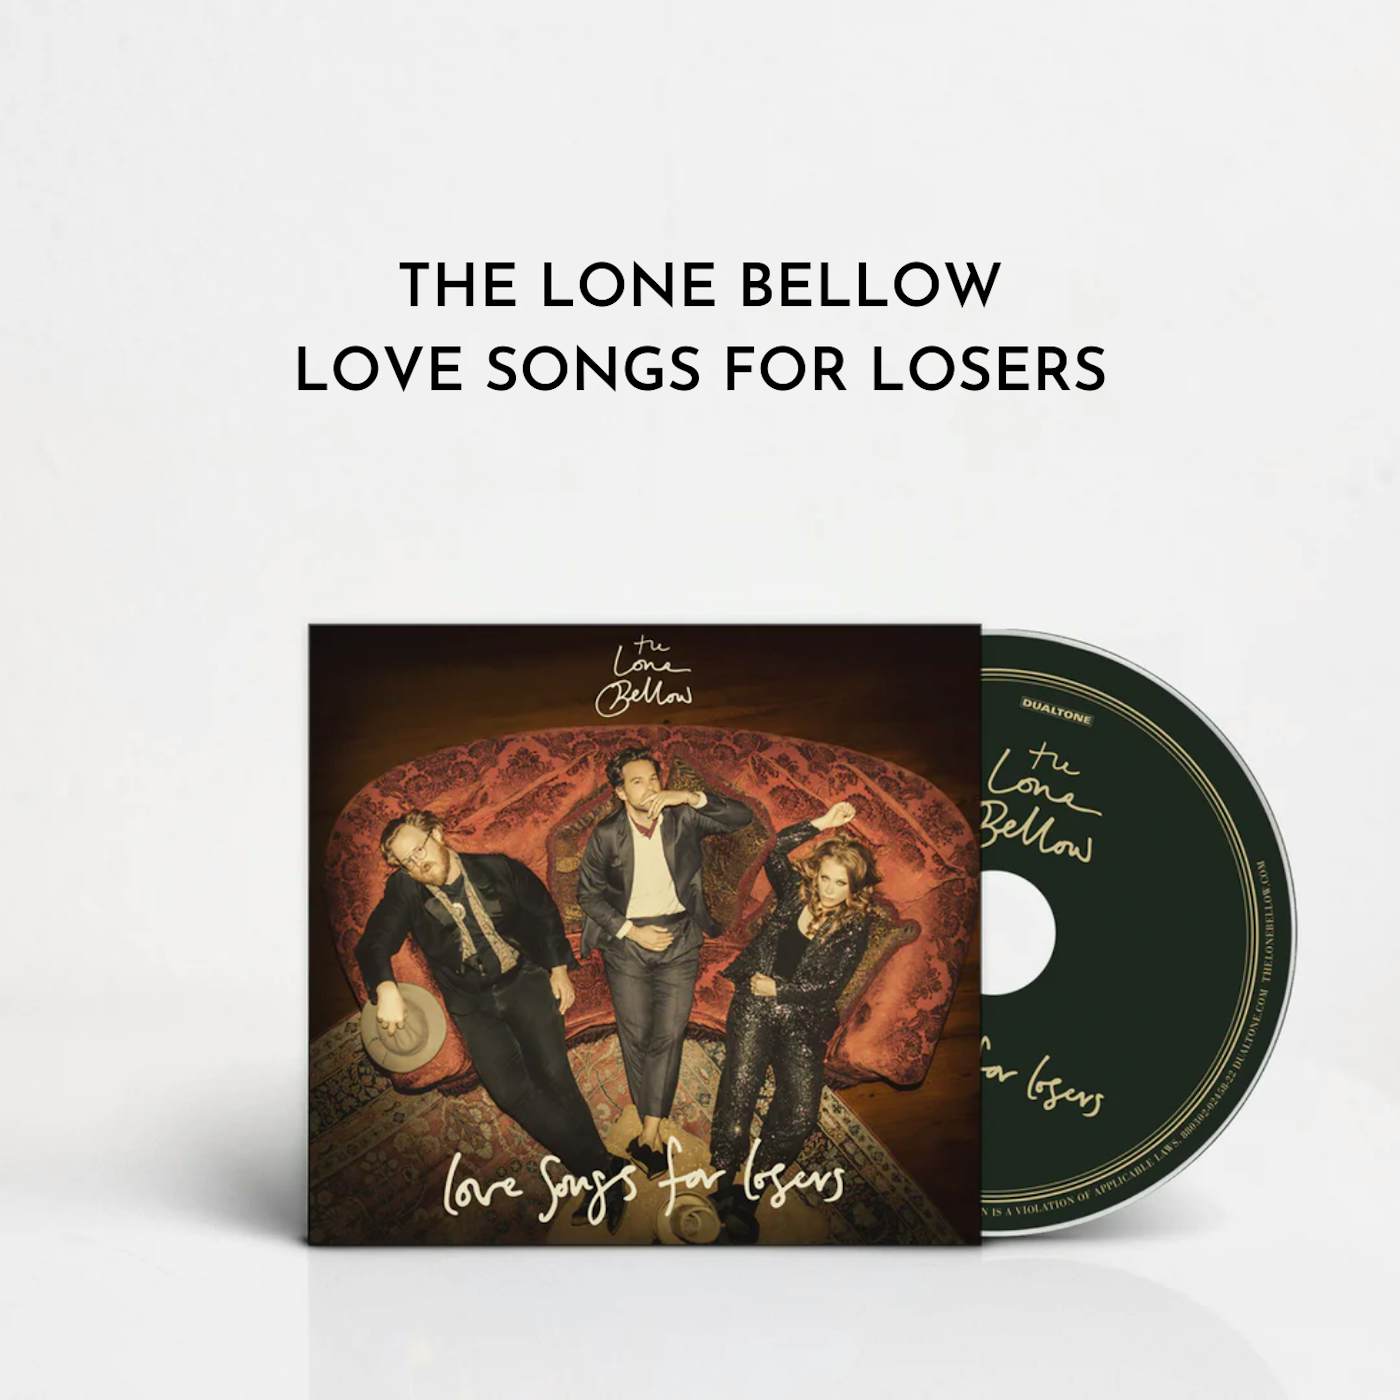 The Lone Bellow Love Songs for Losers (CD)